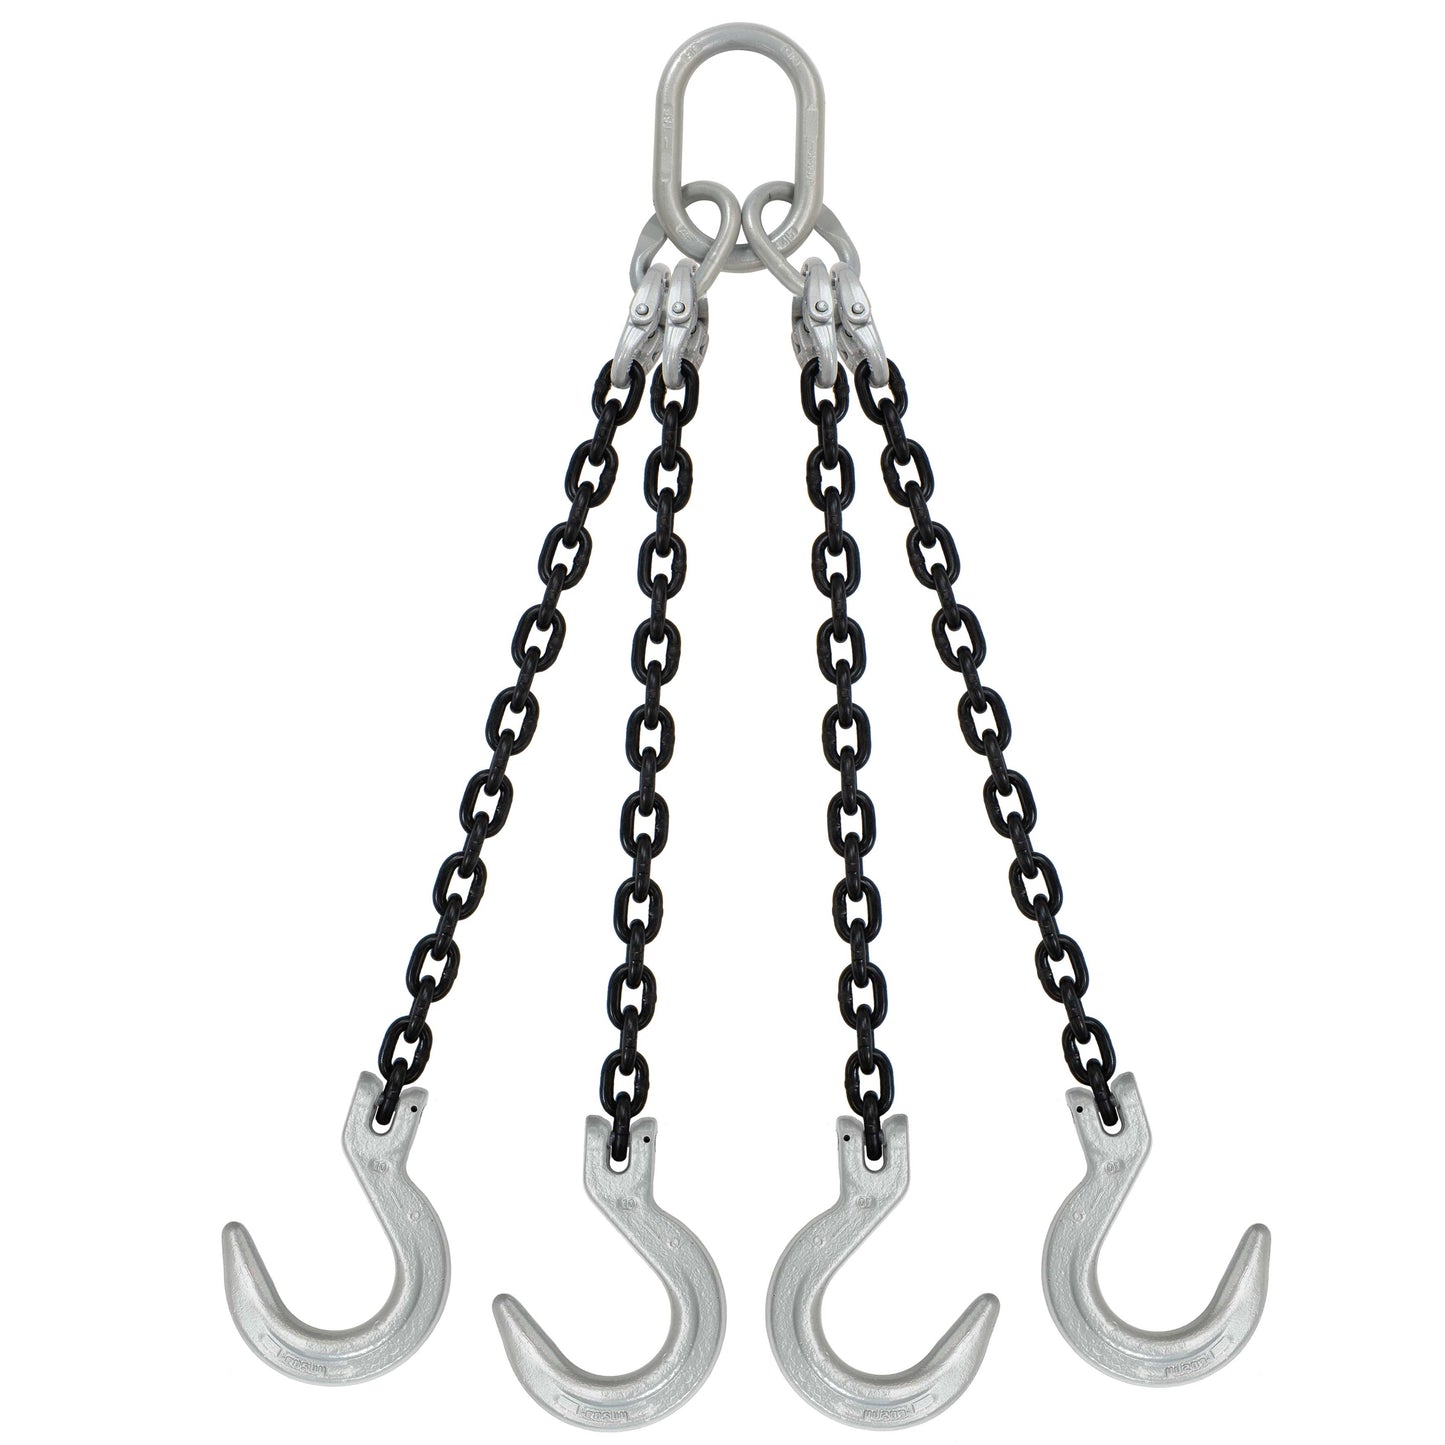 12 inch x 4 foot Domestic 4 Leg Chain Sling w Crosby Foundry Hooks Grade 100 image 1 of 2